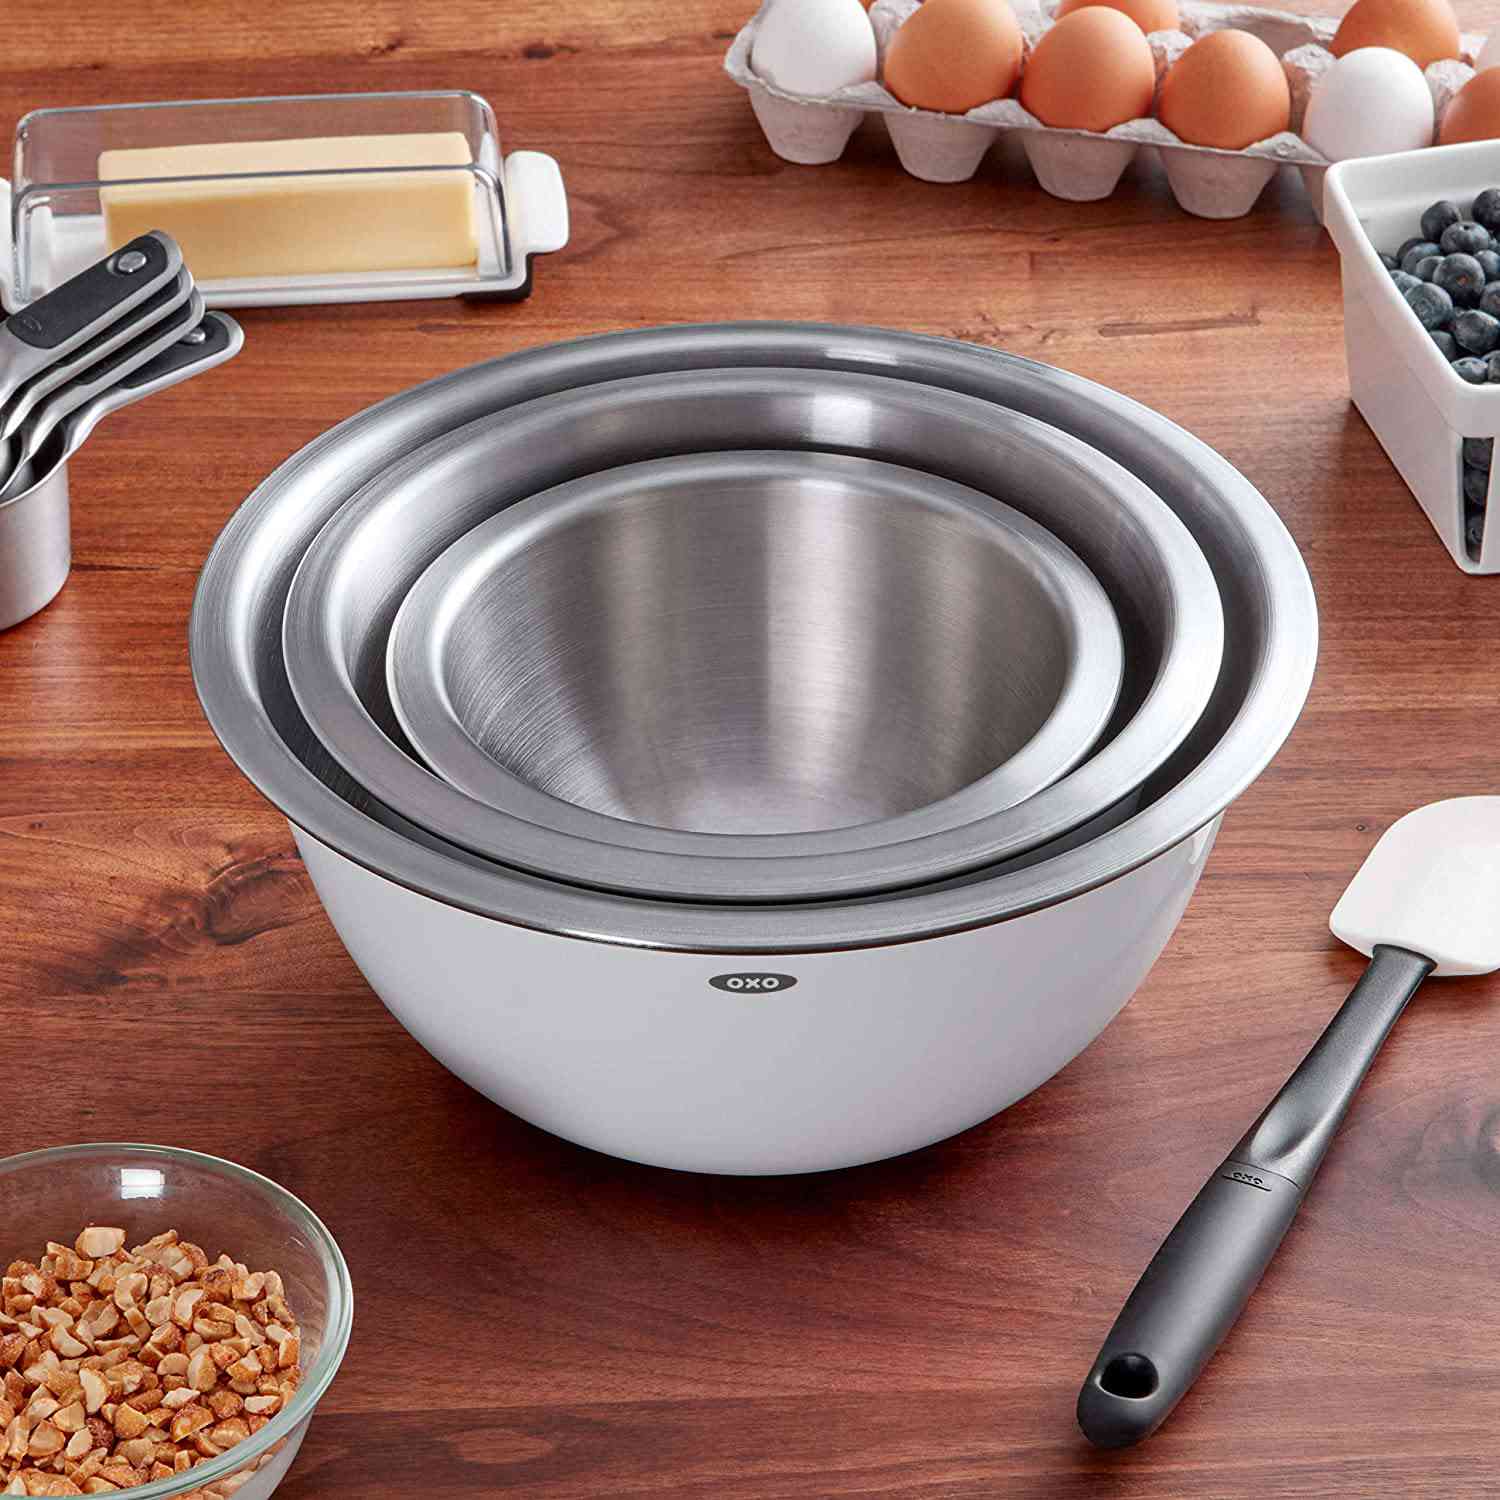 Details about   Stainless Steel Mixing Bowls Nested Mixing Bowl Baking Cooking Salad Mixing Bowl 